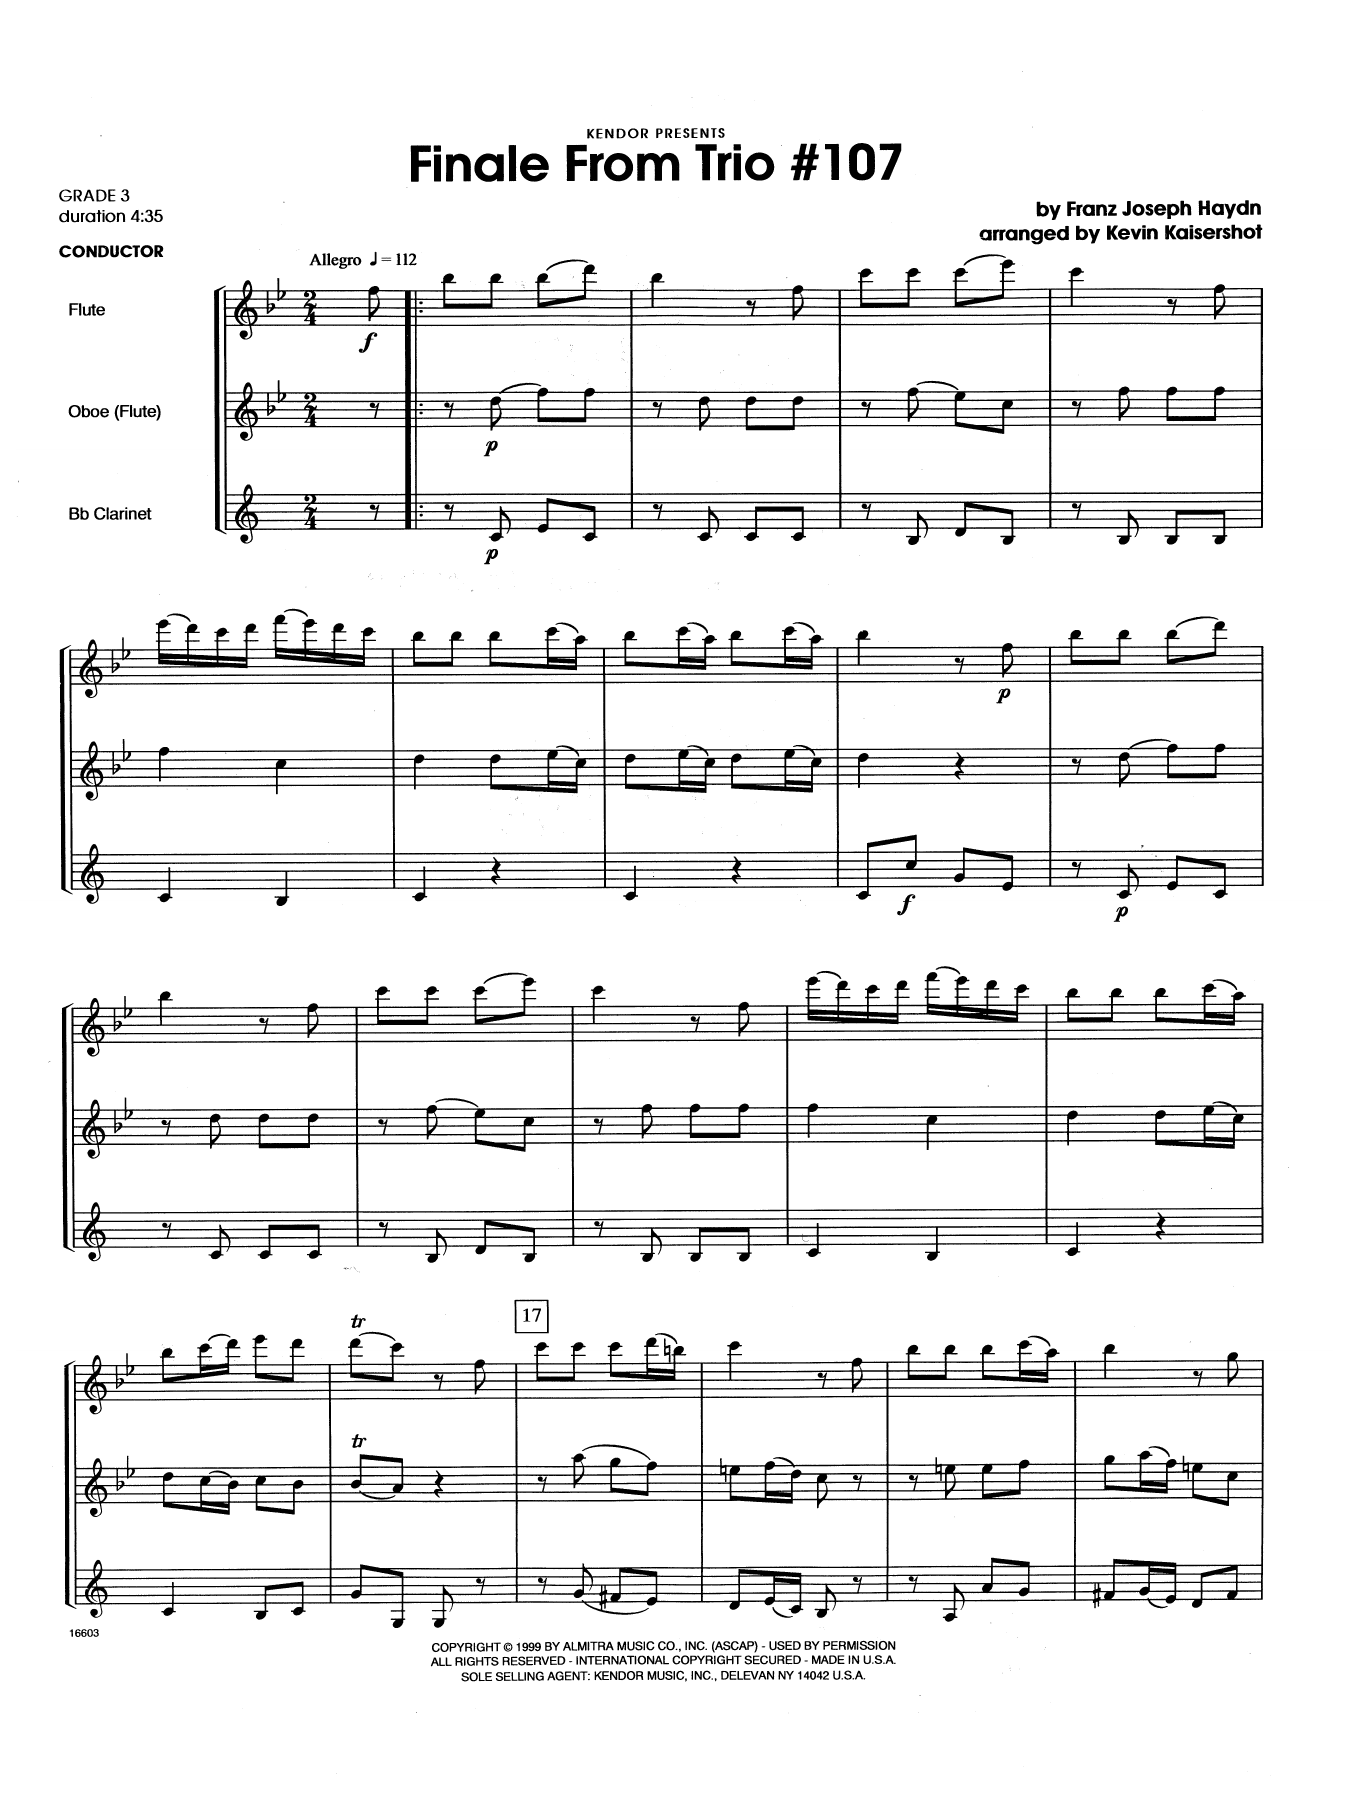 Download Kevin Kaisershot Finale From Trio #107 - Full Score Sheet Music